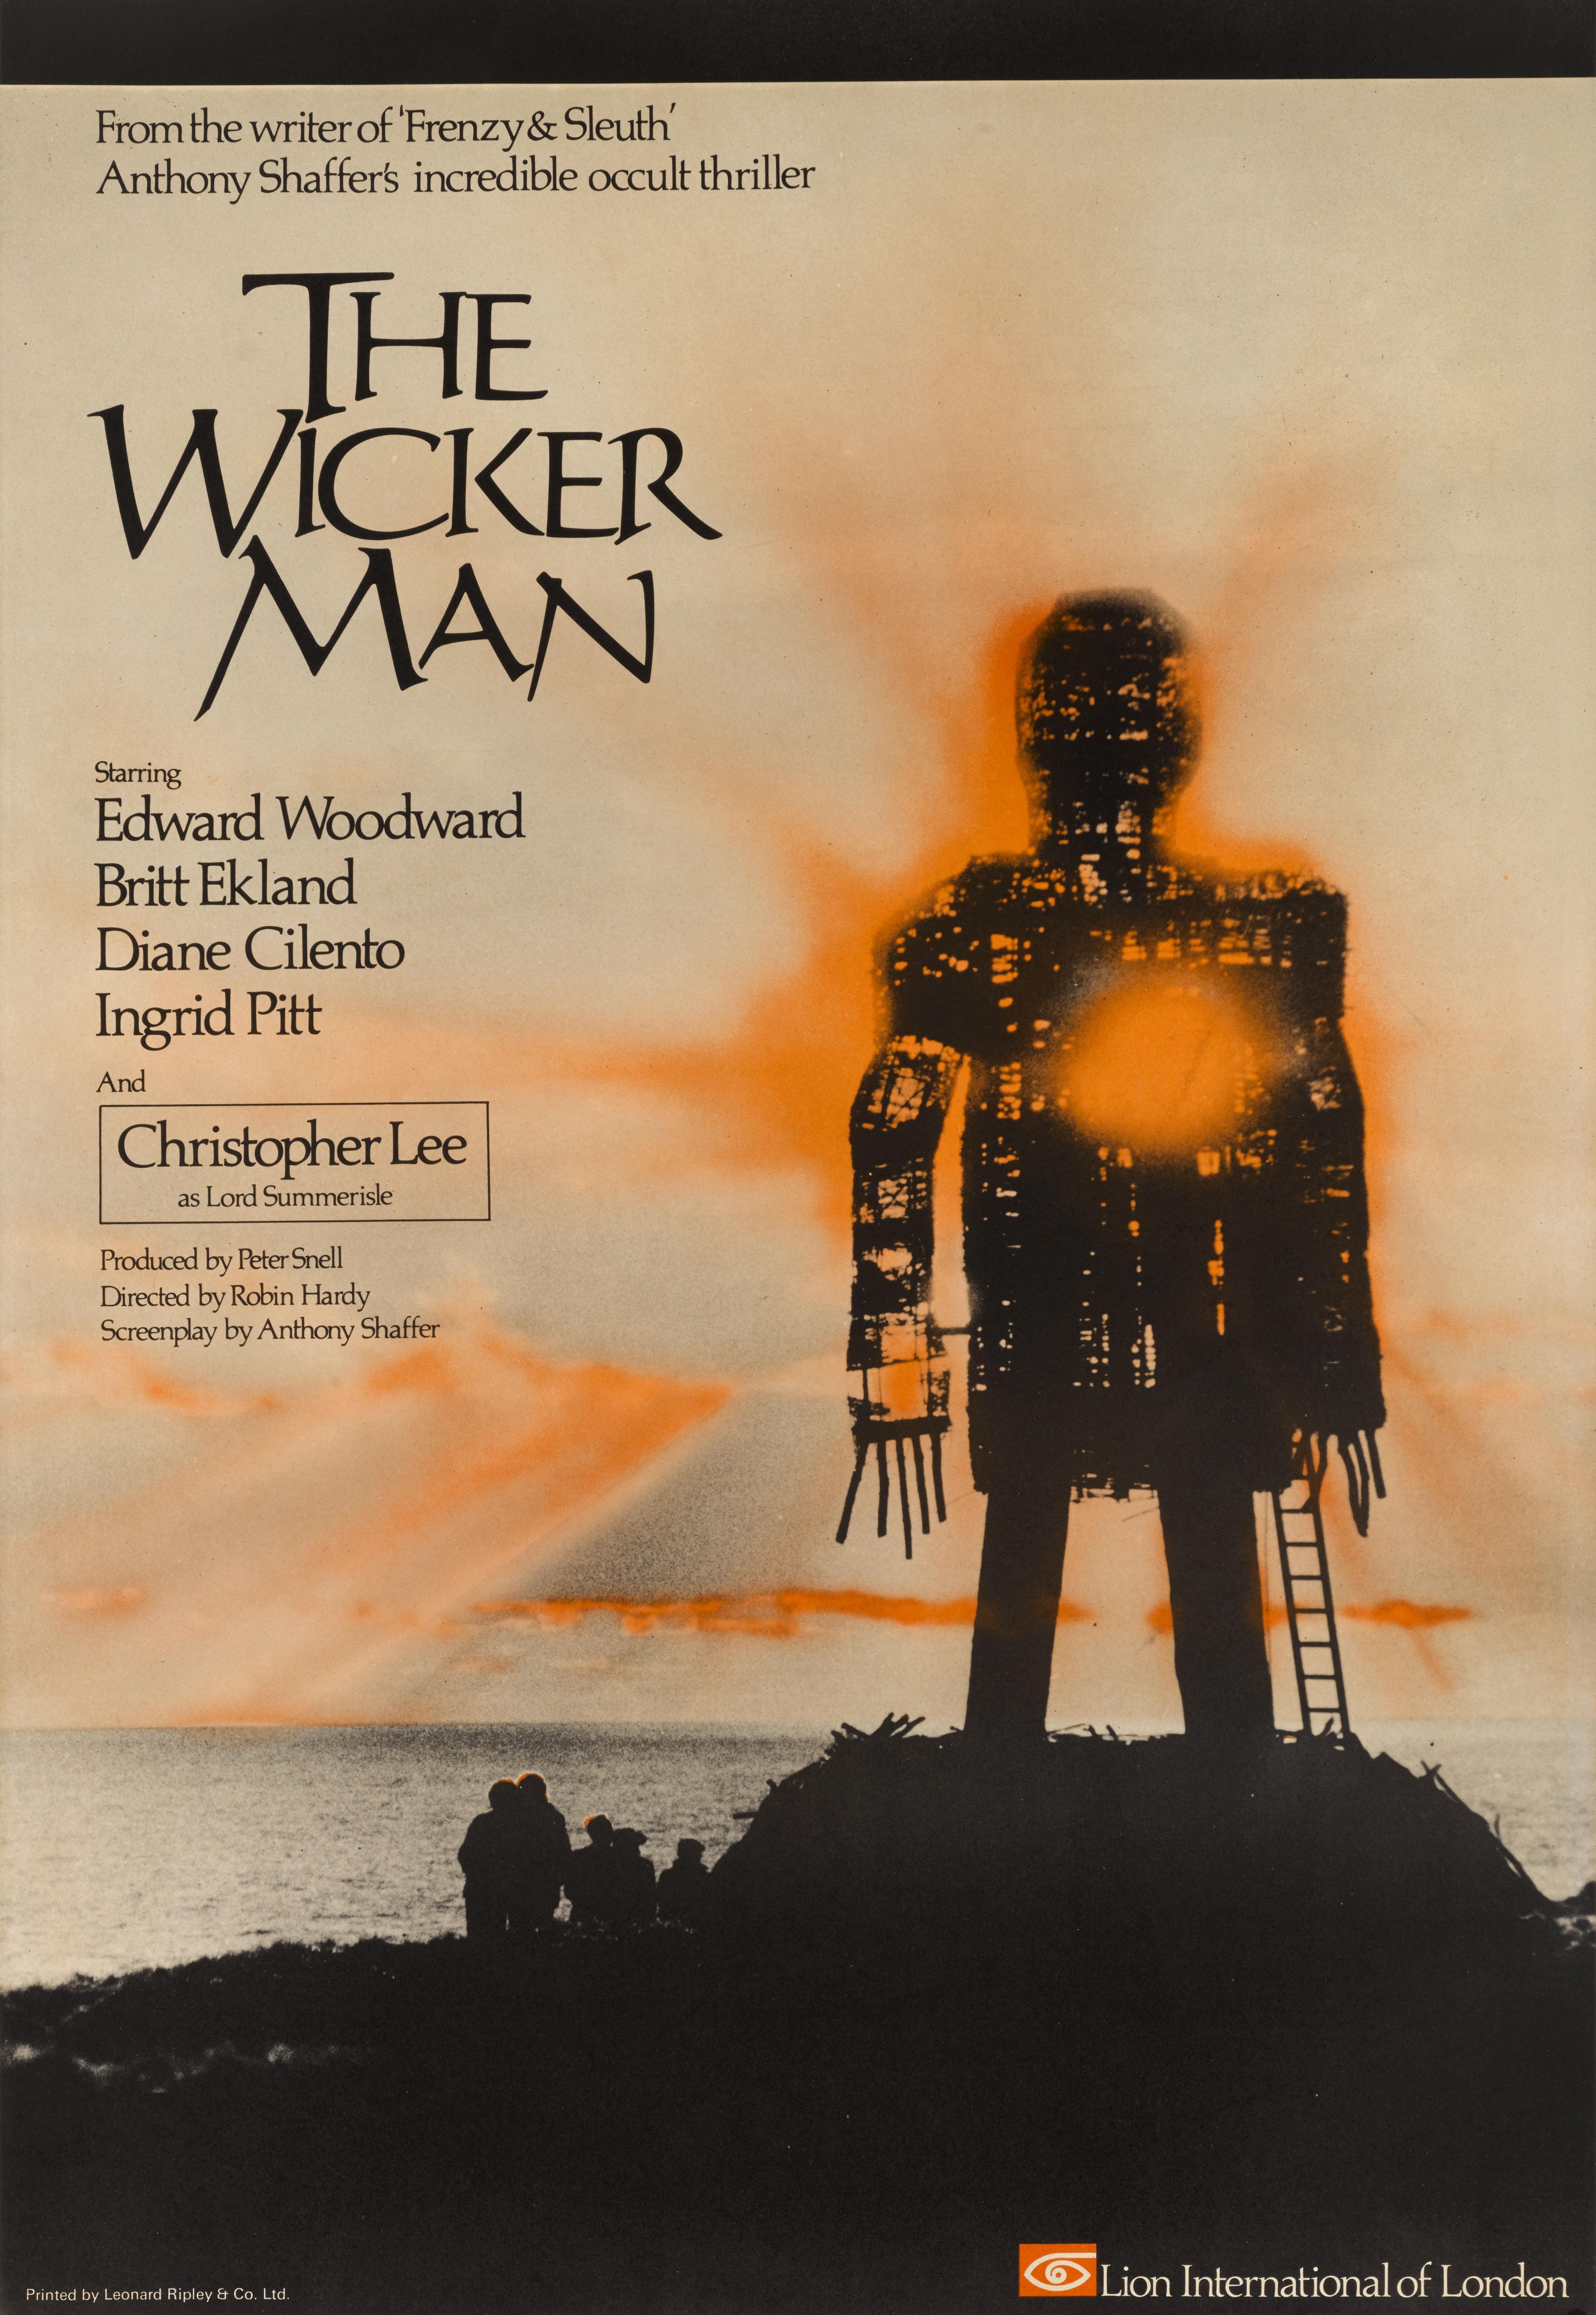 Original British film for the 1973 Horror film The Wicker Man. The film was directed by Robin Hardy and starred Edward Woodward, Christopher Lee. This poster has been conservation Linen backed and would be shipped rolled in a strong tube.